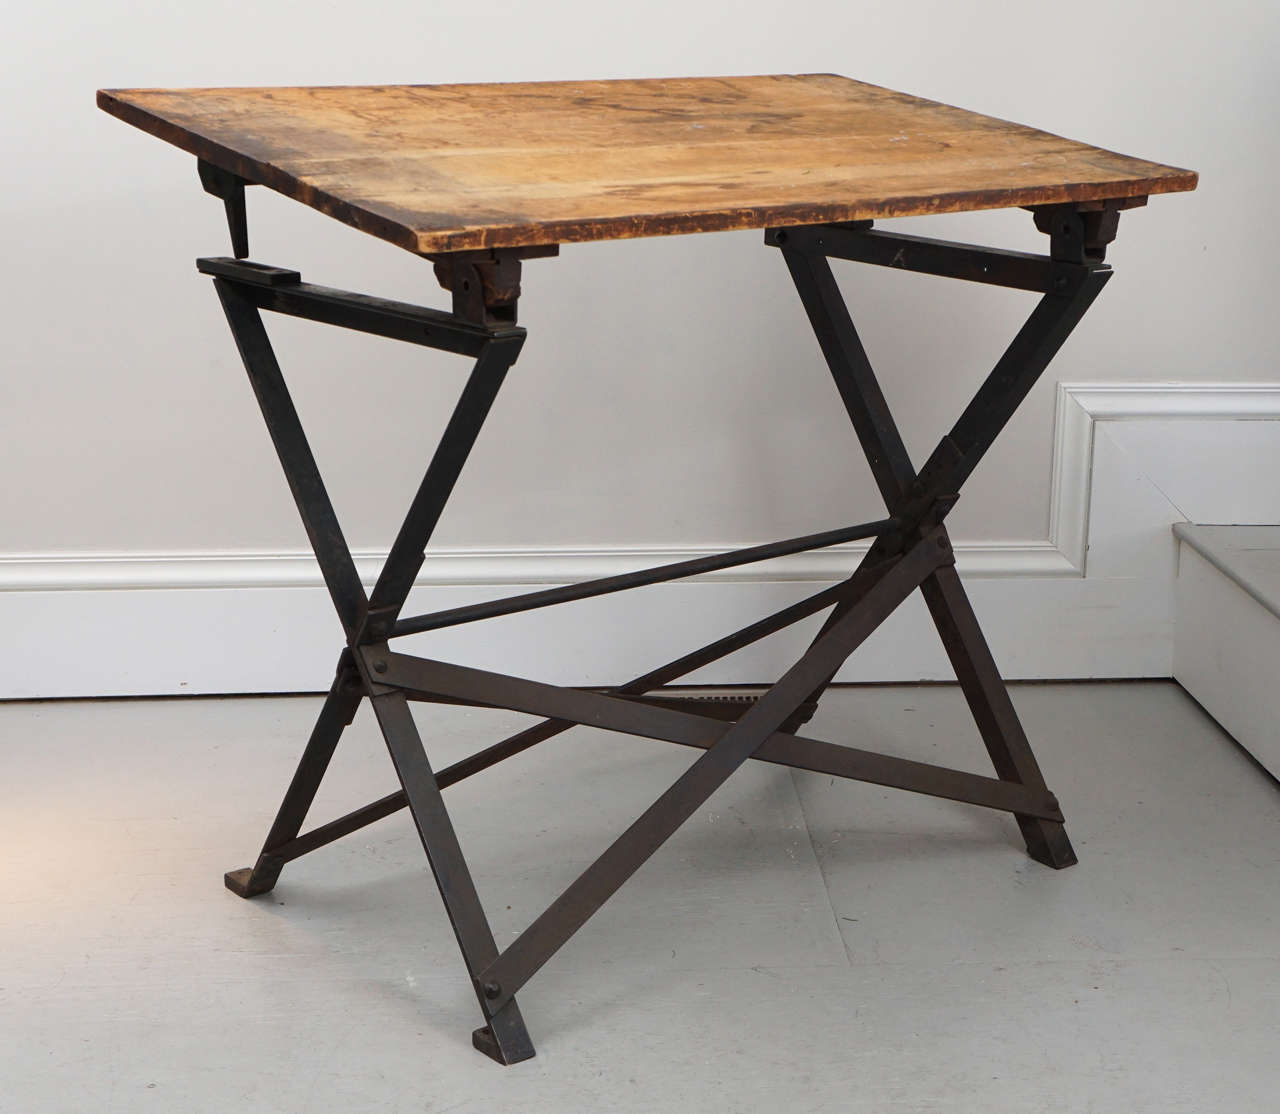 A handsome looking Industrial drafting table. The top adjusts to different angles.